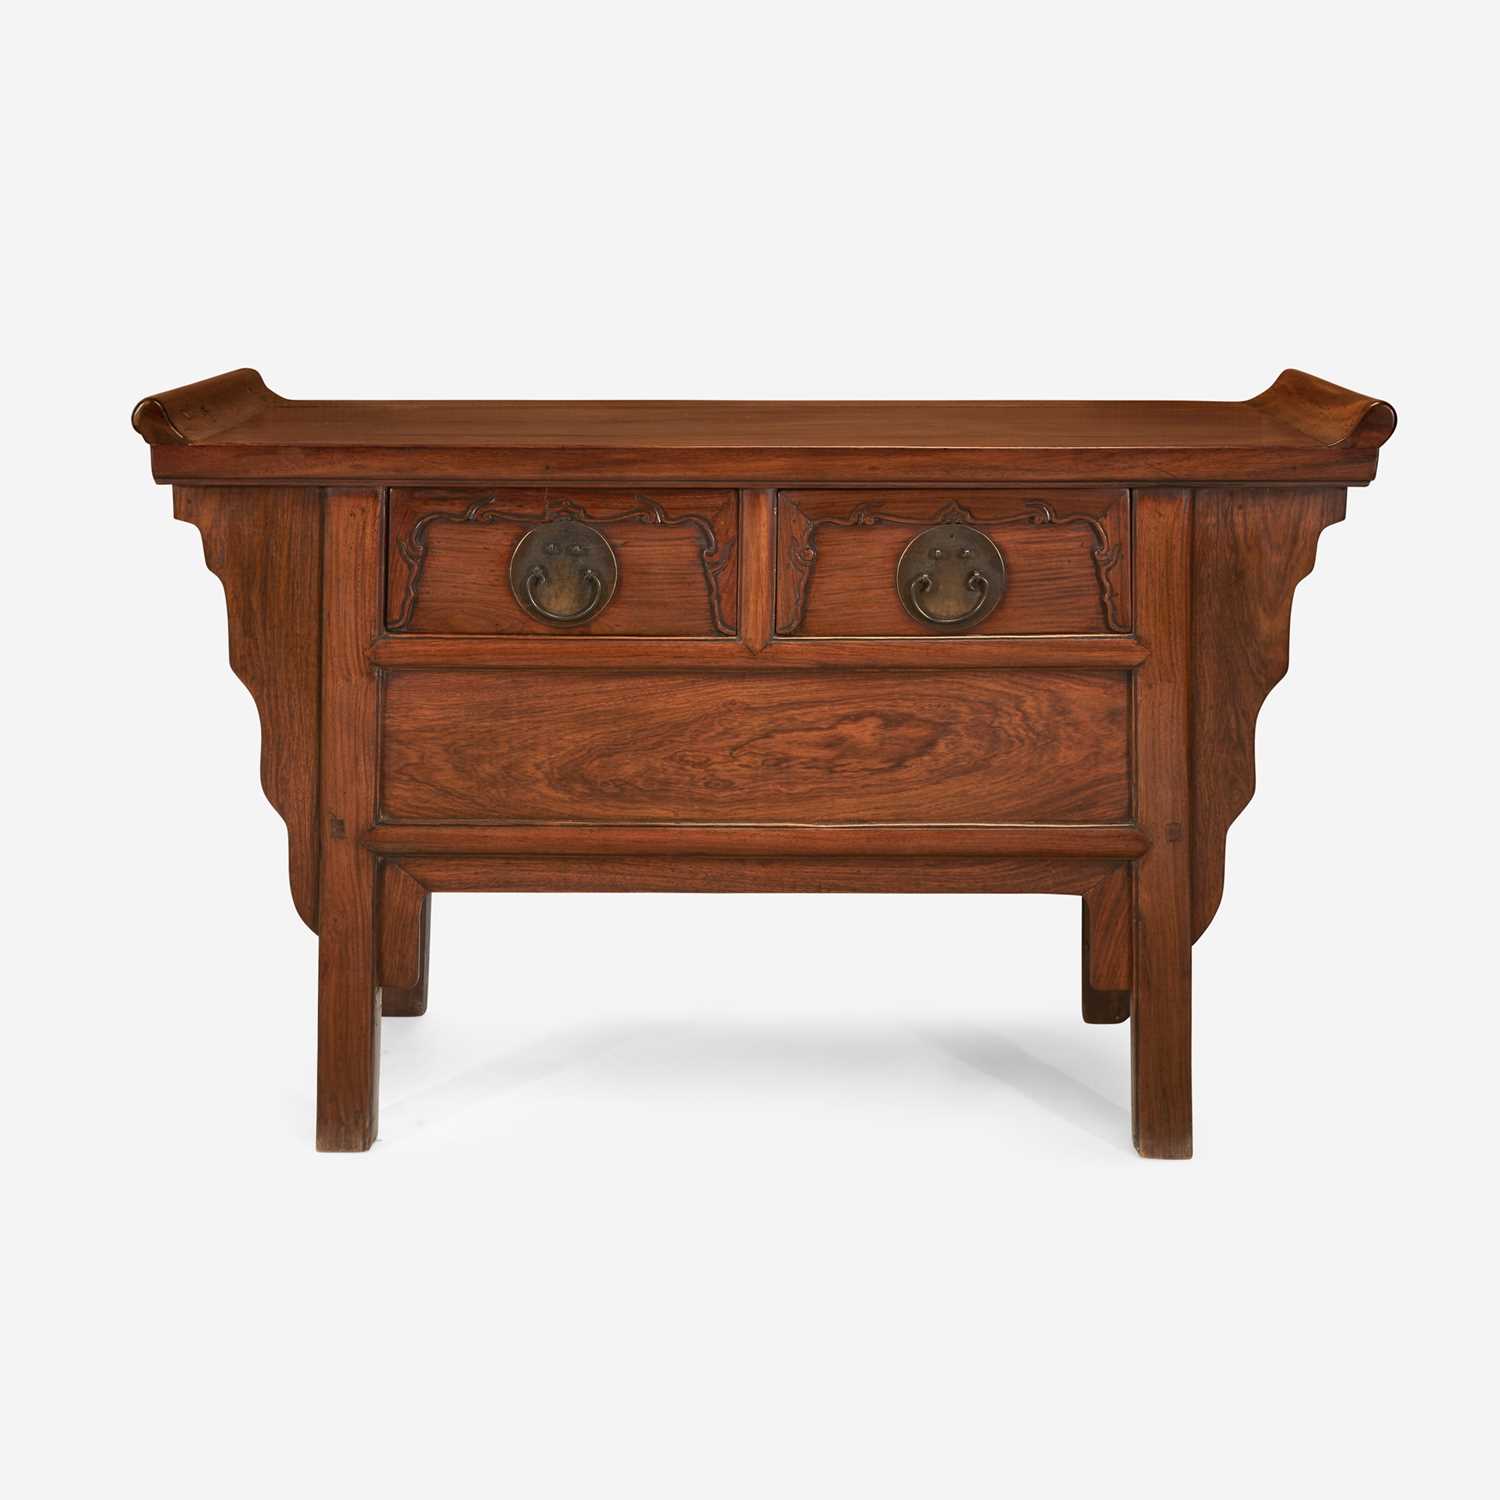 Lot 59 - A Chinese mixed hardwood two-drawer coffer table, Lianerchu